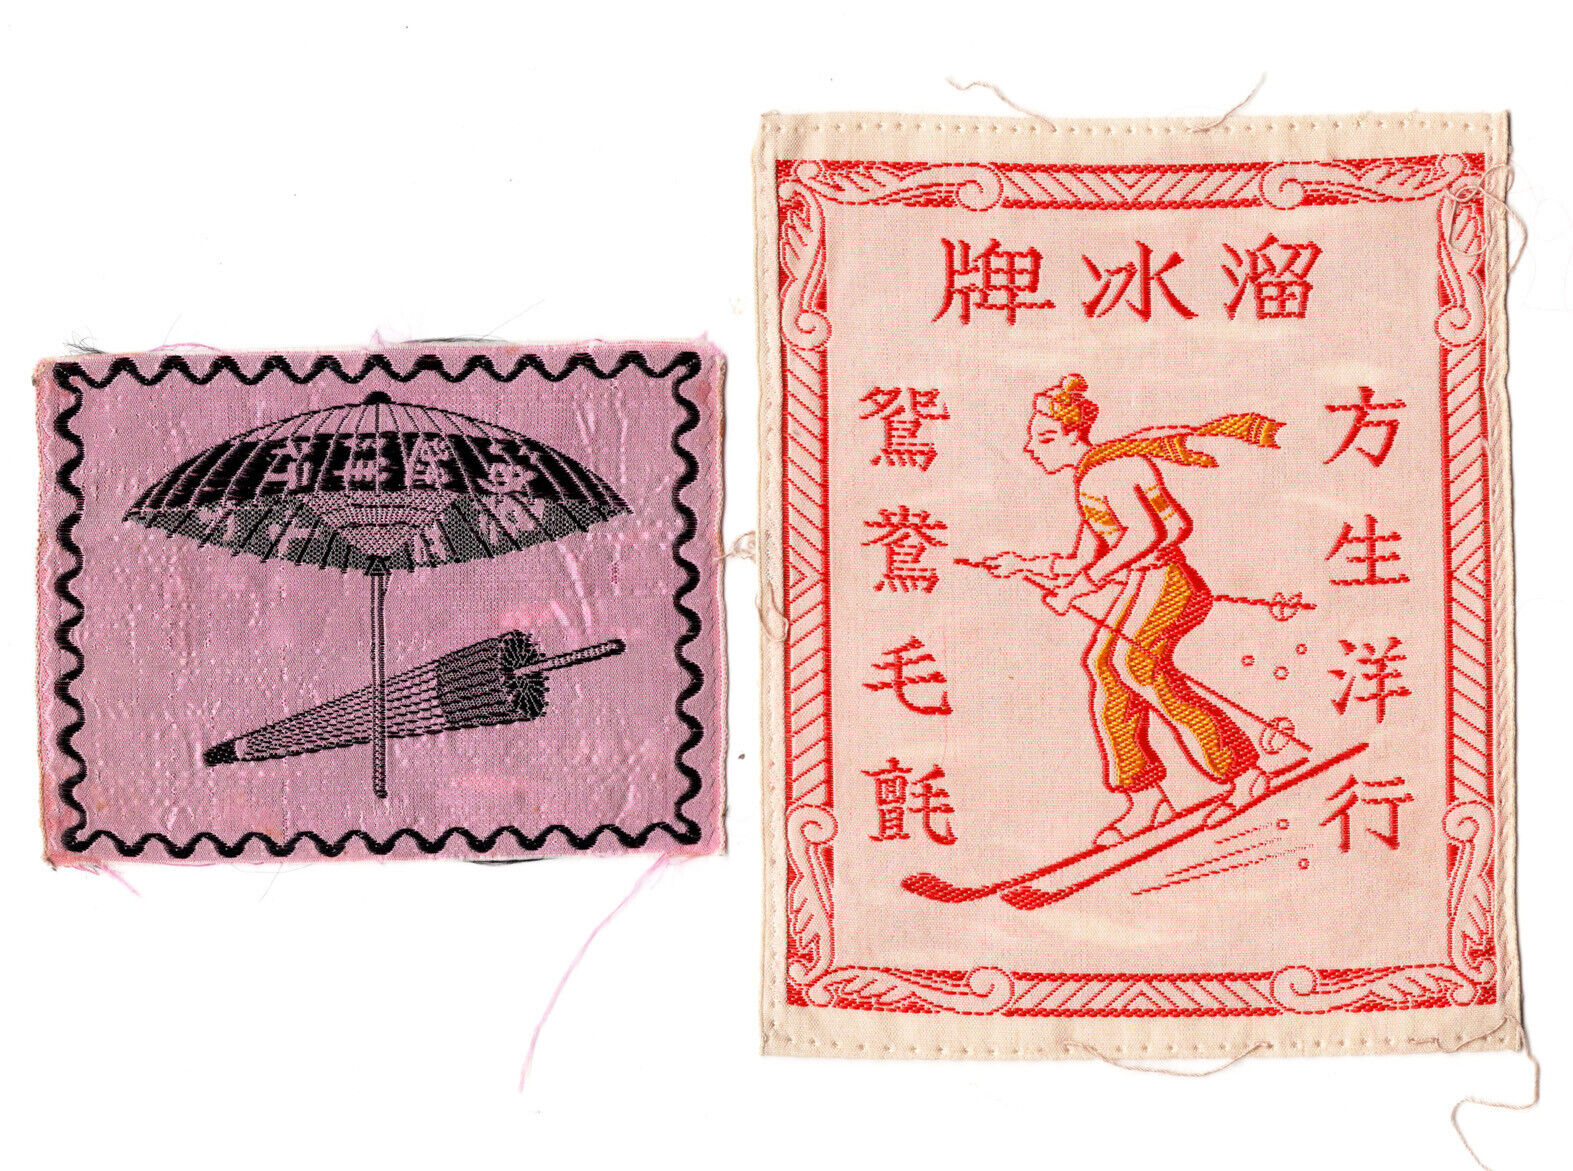 2 Vintage Chinese Woven Cloth Blanket Labels Skiing Umbrella Textiles China